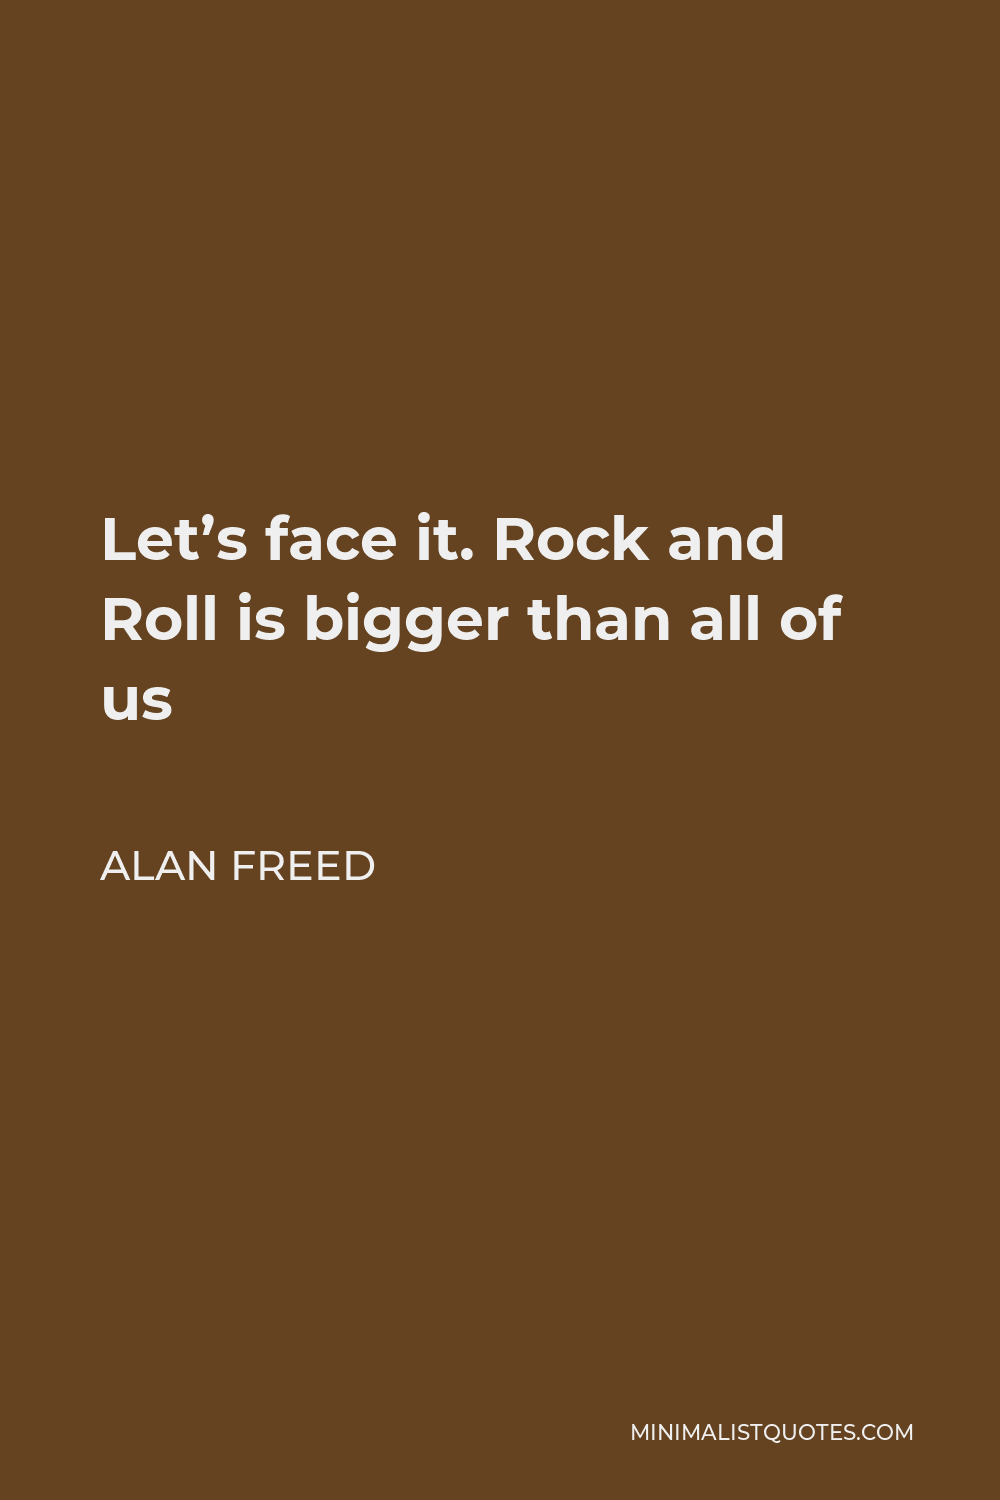 Alan Freed Quote - Let’s face it. Rock and Roll is bigger than all of us